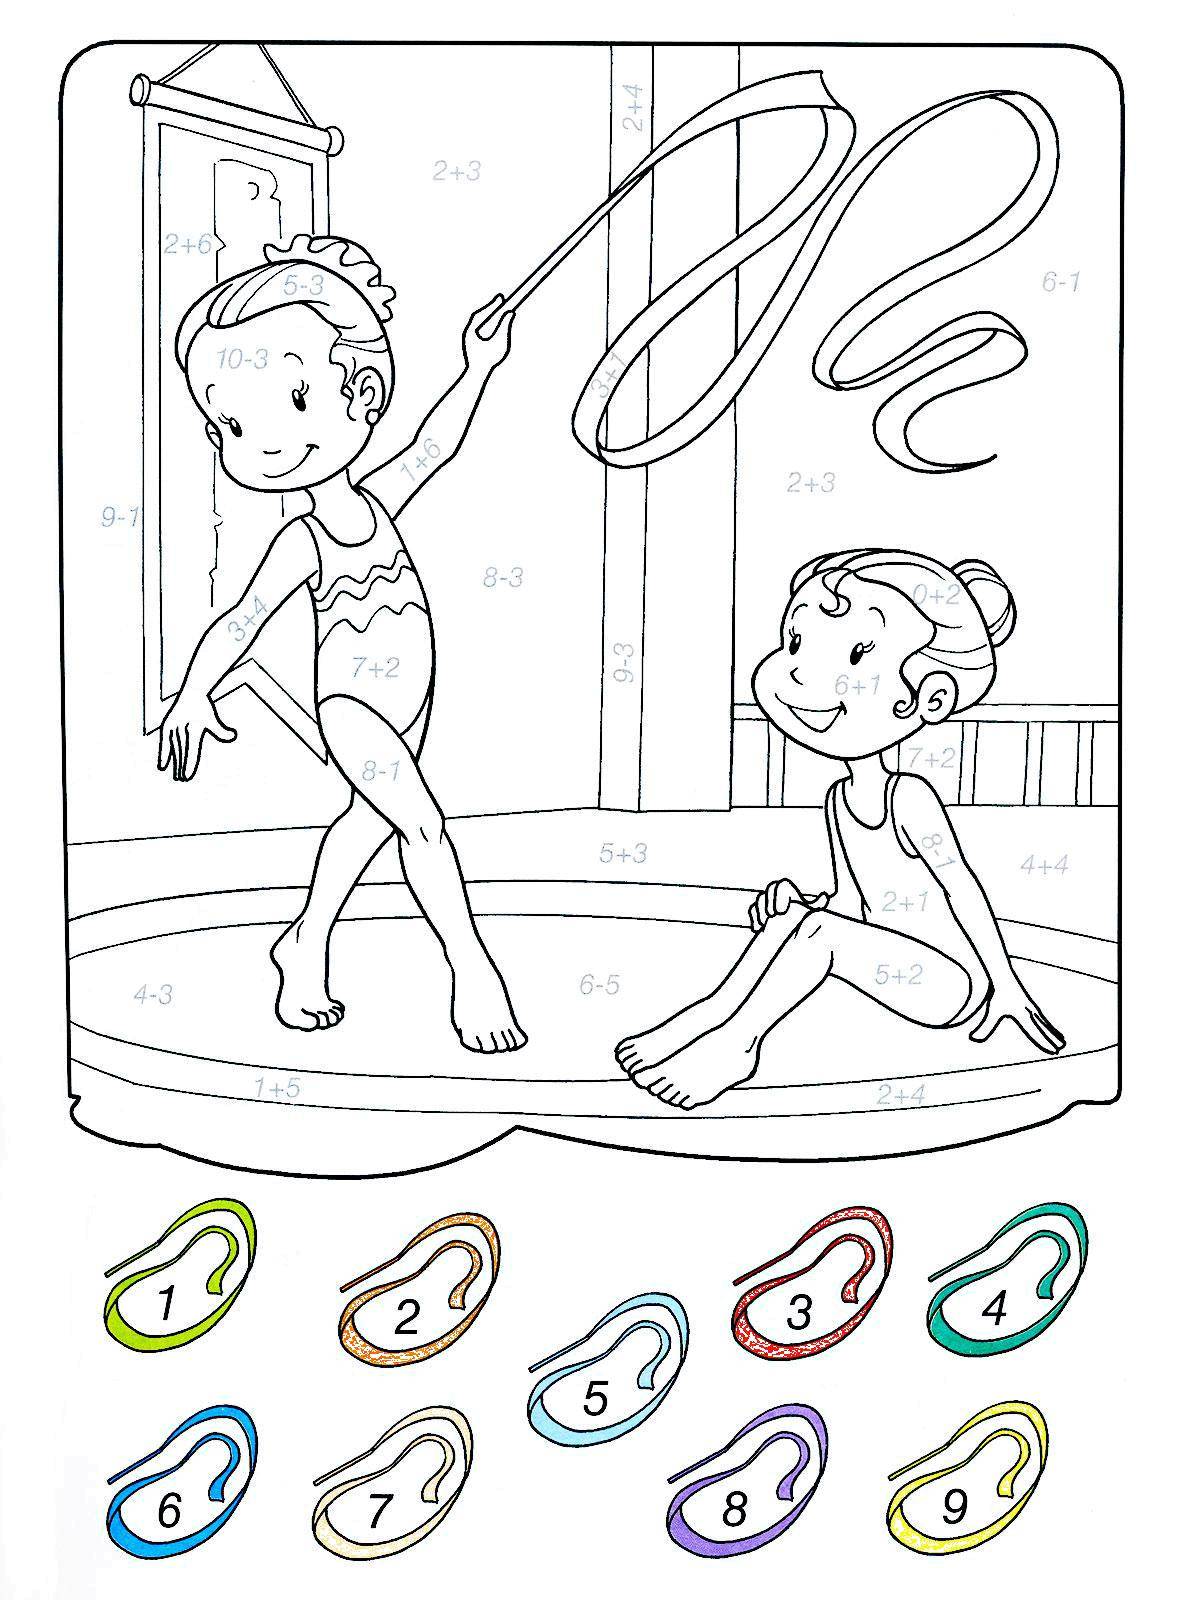 Coloring Solve examples and paint a picture by numbers. Category mathematical coloring pages. Tags:  sports, exercises, examples.